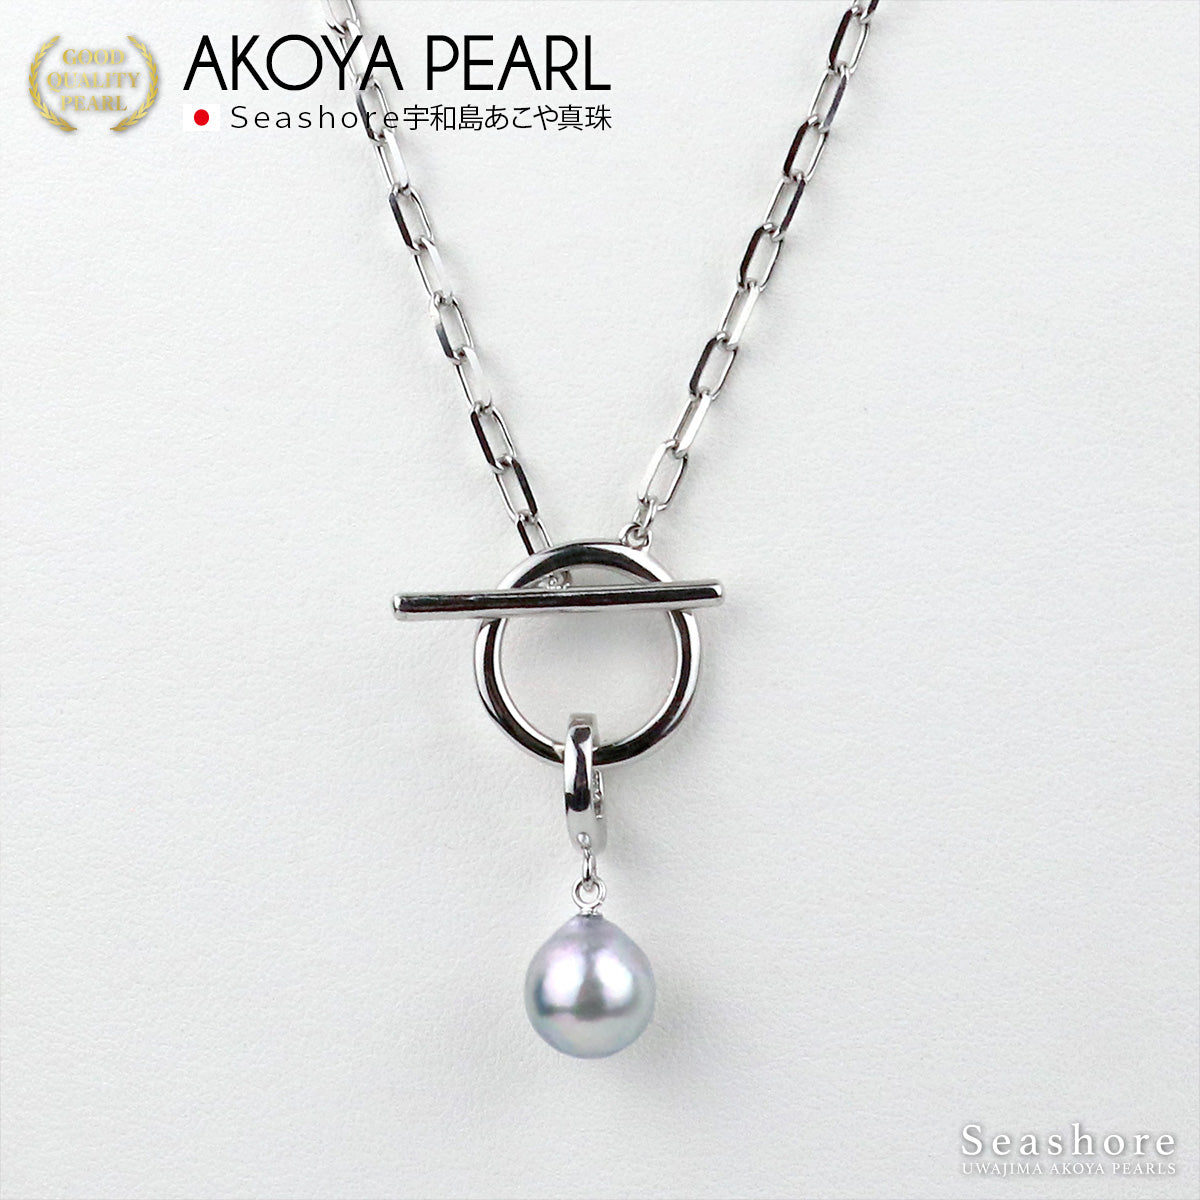 [Natural Blue] Uncolored Akoya Pearl Mantel Necklace [9.5-10.0mm] Stainless Steel Unisex Pearl Accessory (4156)